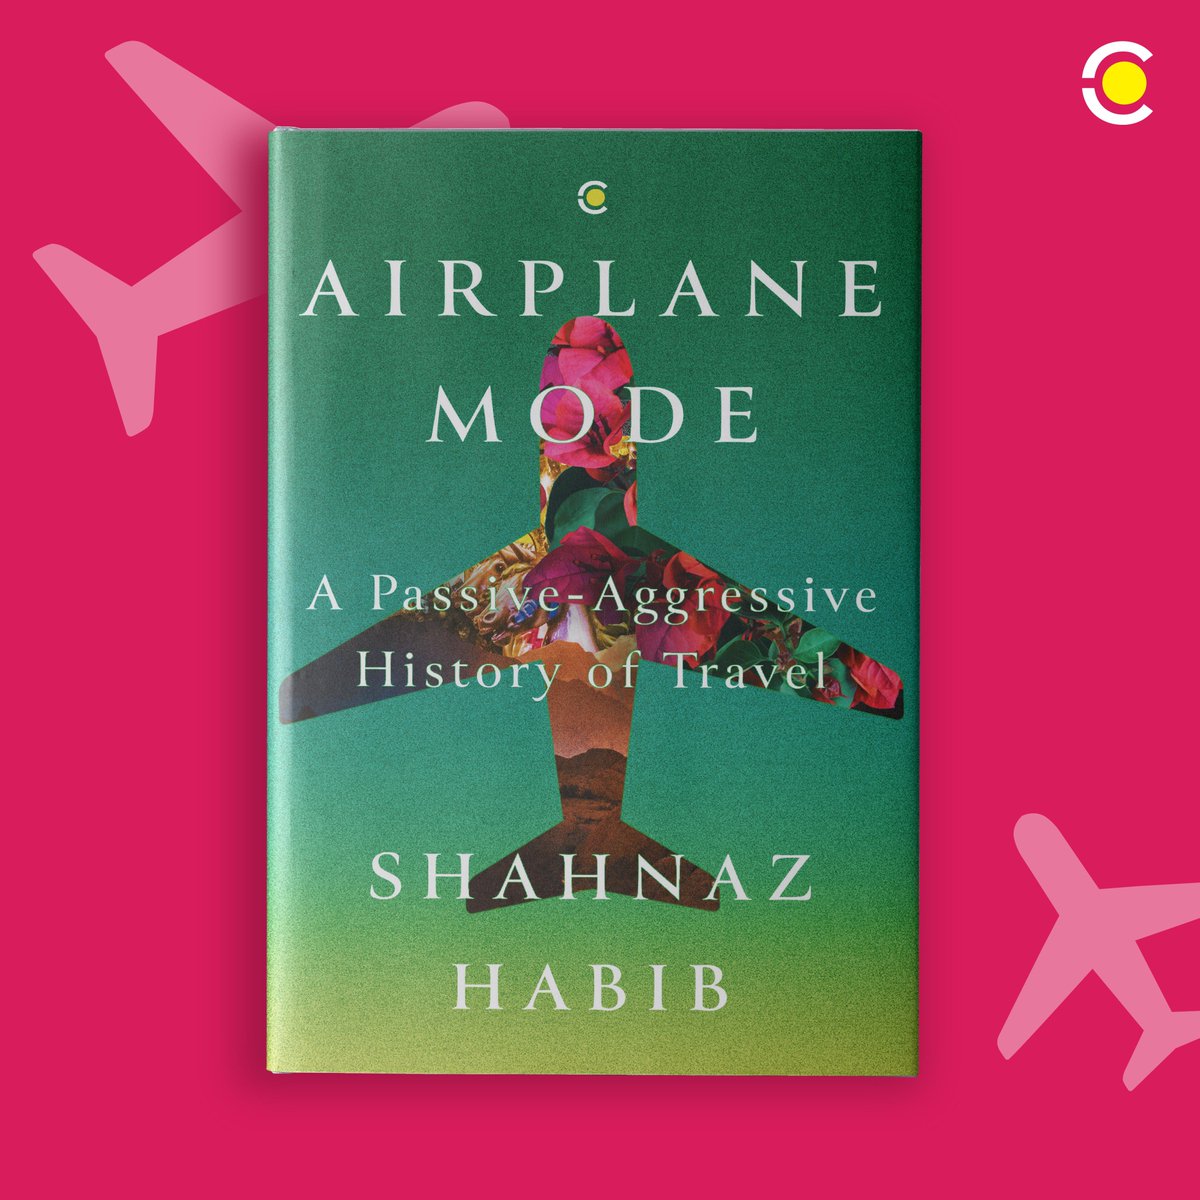 For more such interesting details, get your copy of @mixedmsgs's funny and brilliant book Airplane Mode. Available at all bookstores and online.